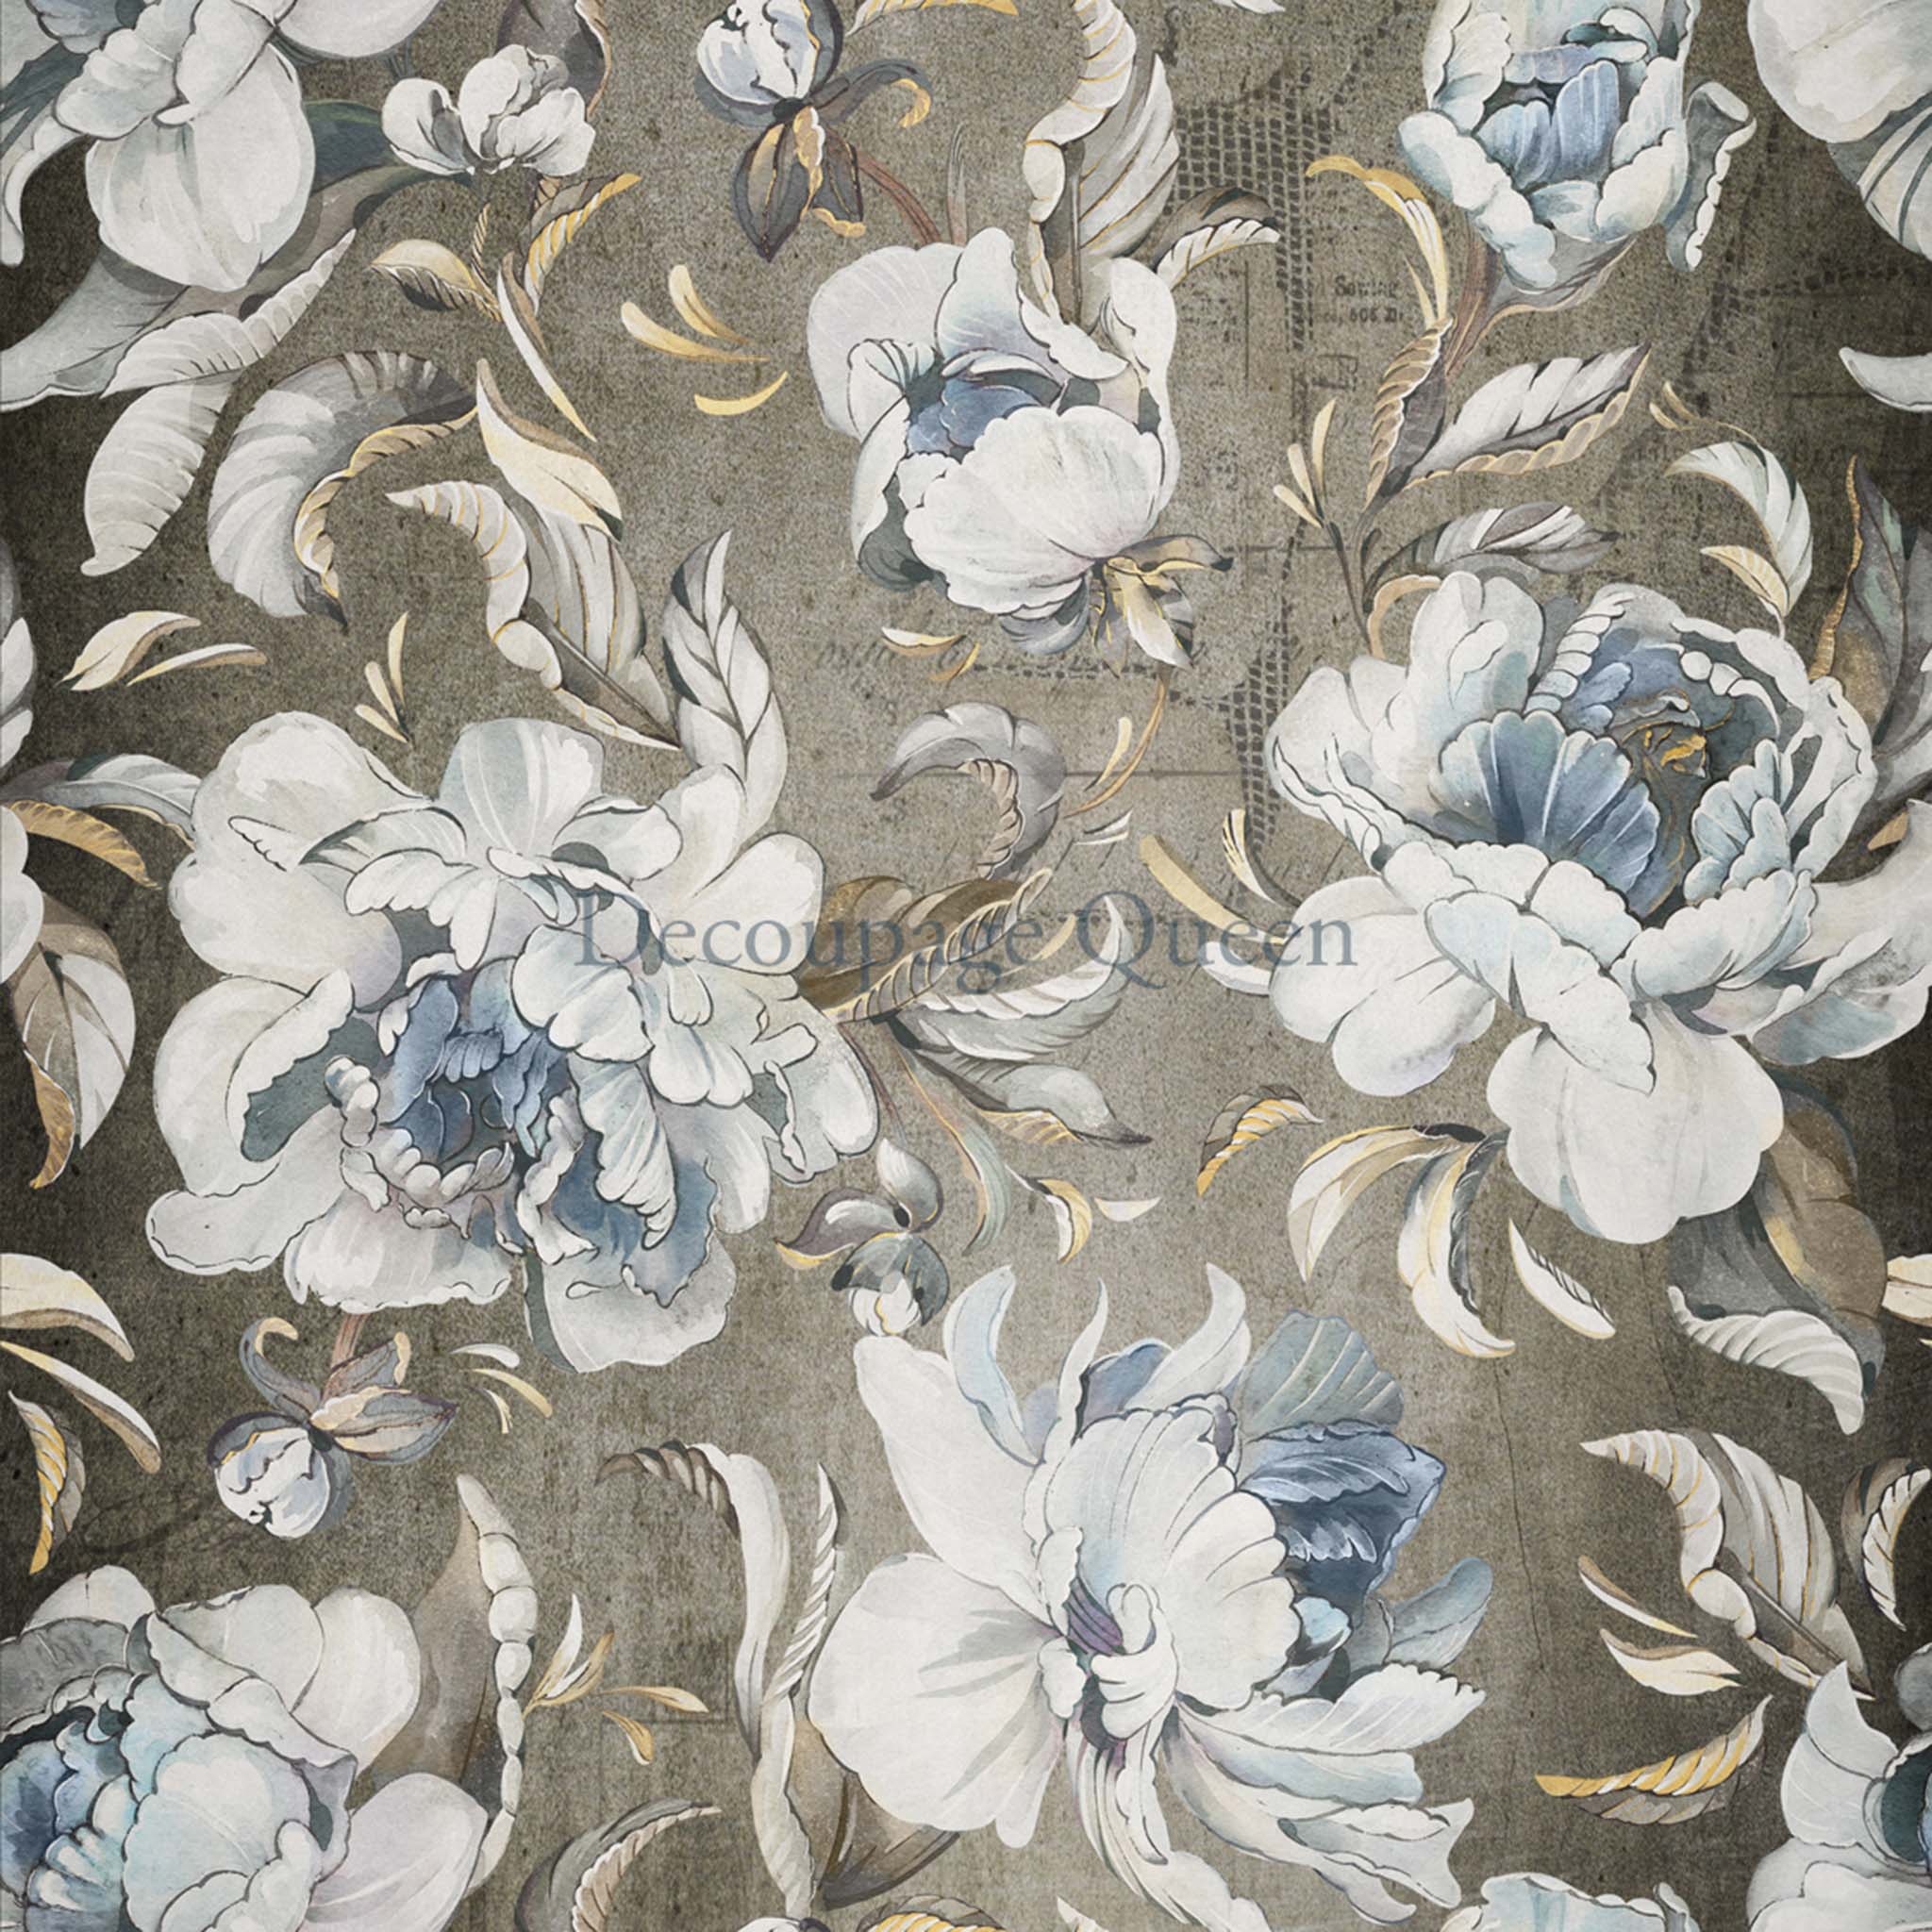 Close-up of an A3 rice paper that features a soft gray background, adorned with delicate white and blue flower designs.